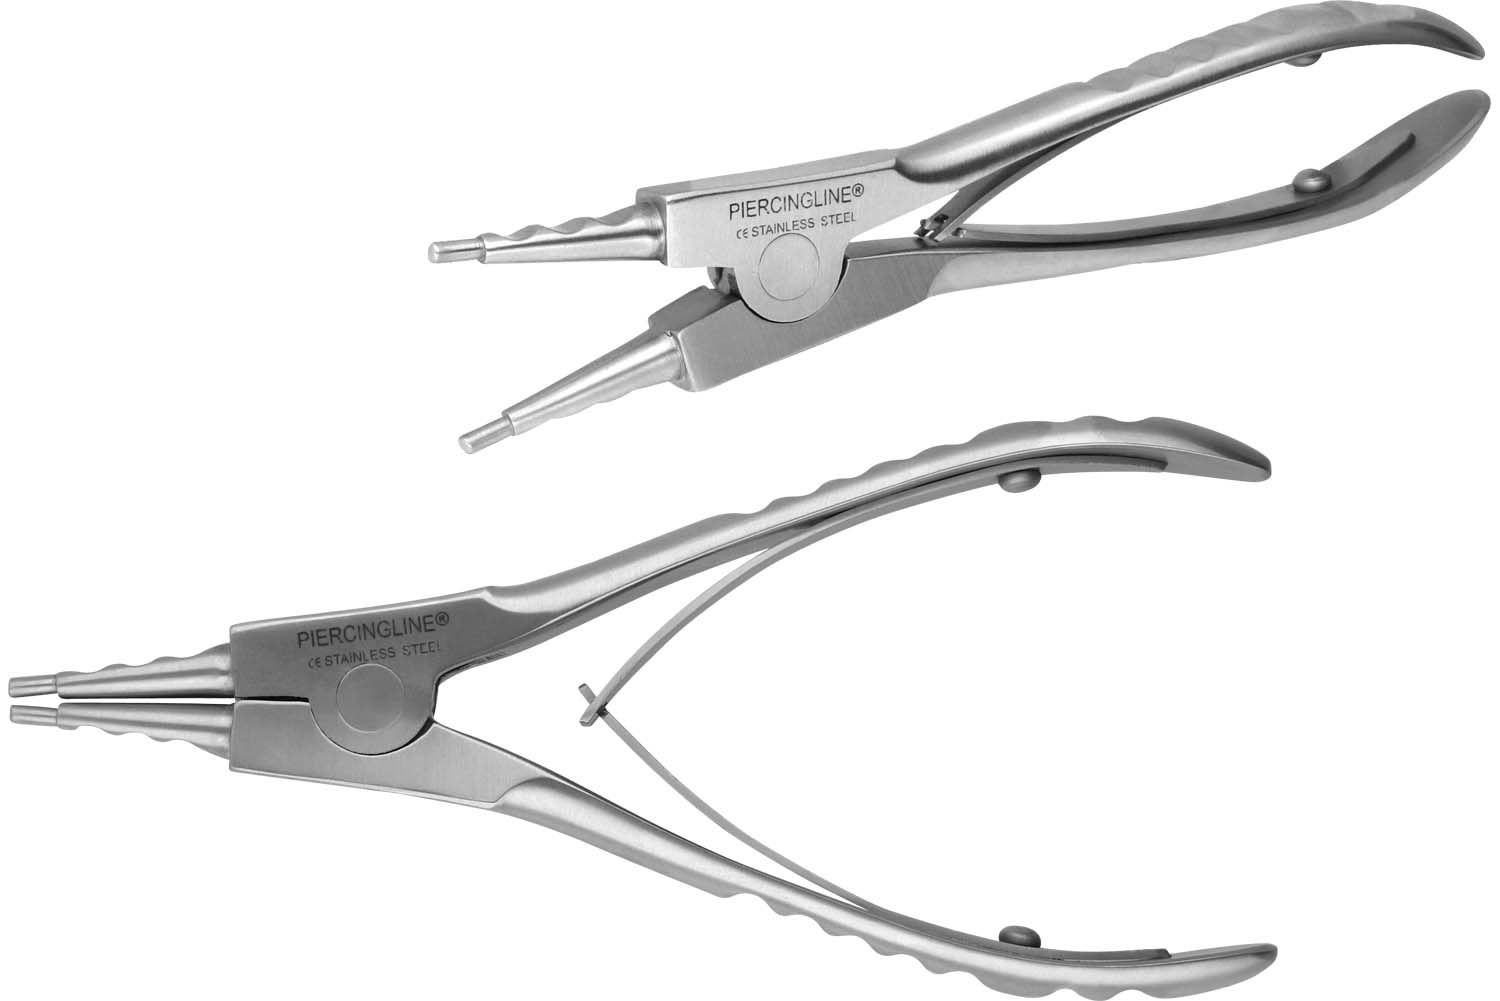 Stainless steel ring opening pliers SMALL